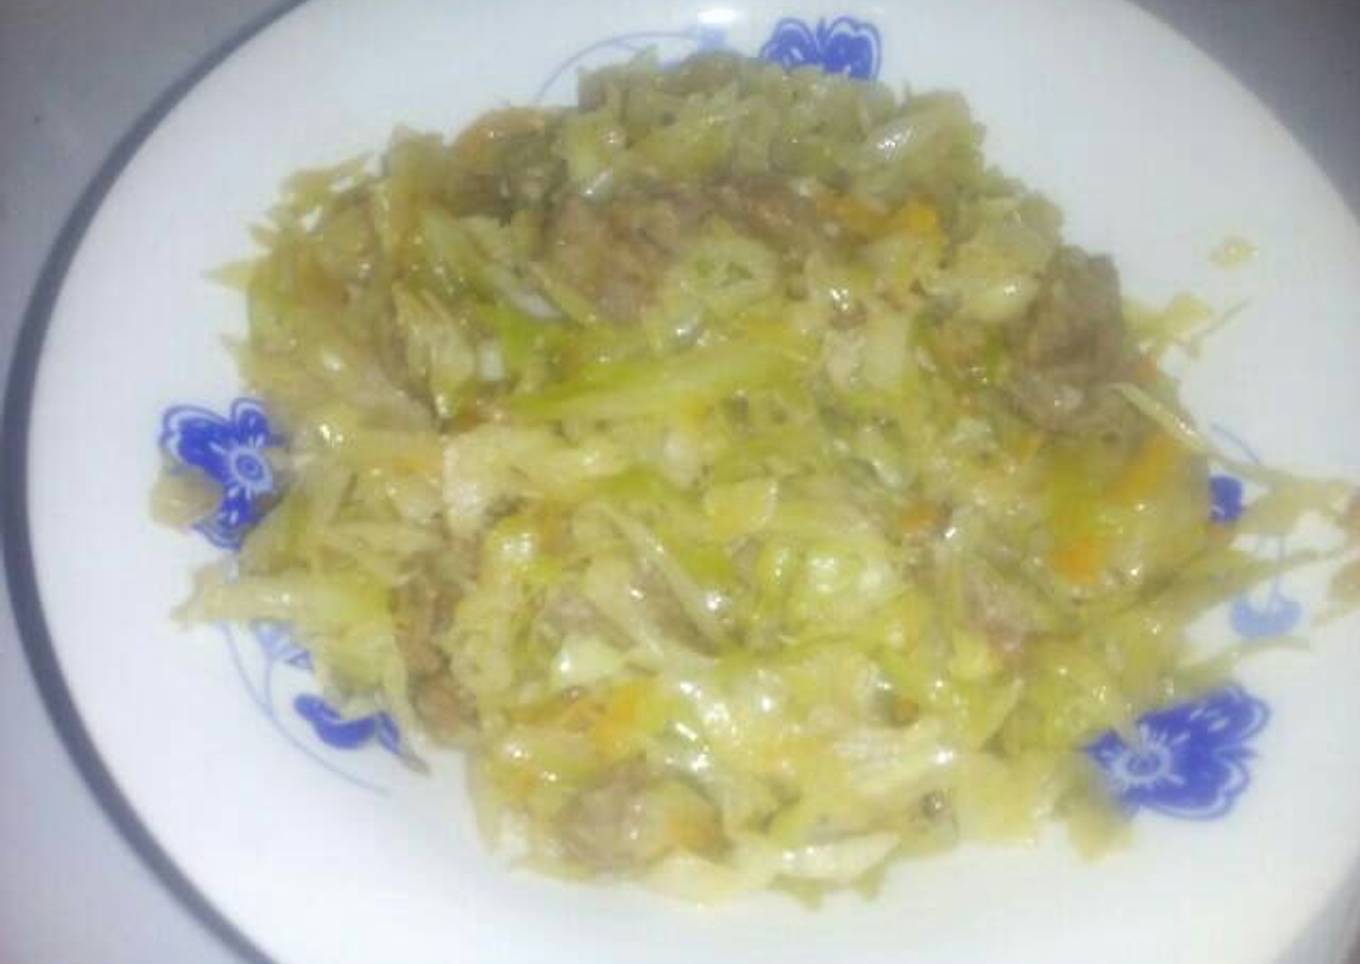 Mix cabbage and beef